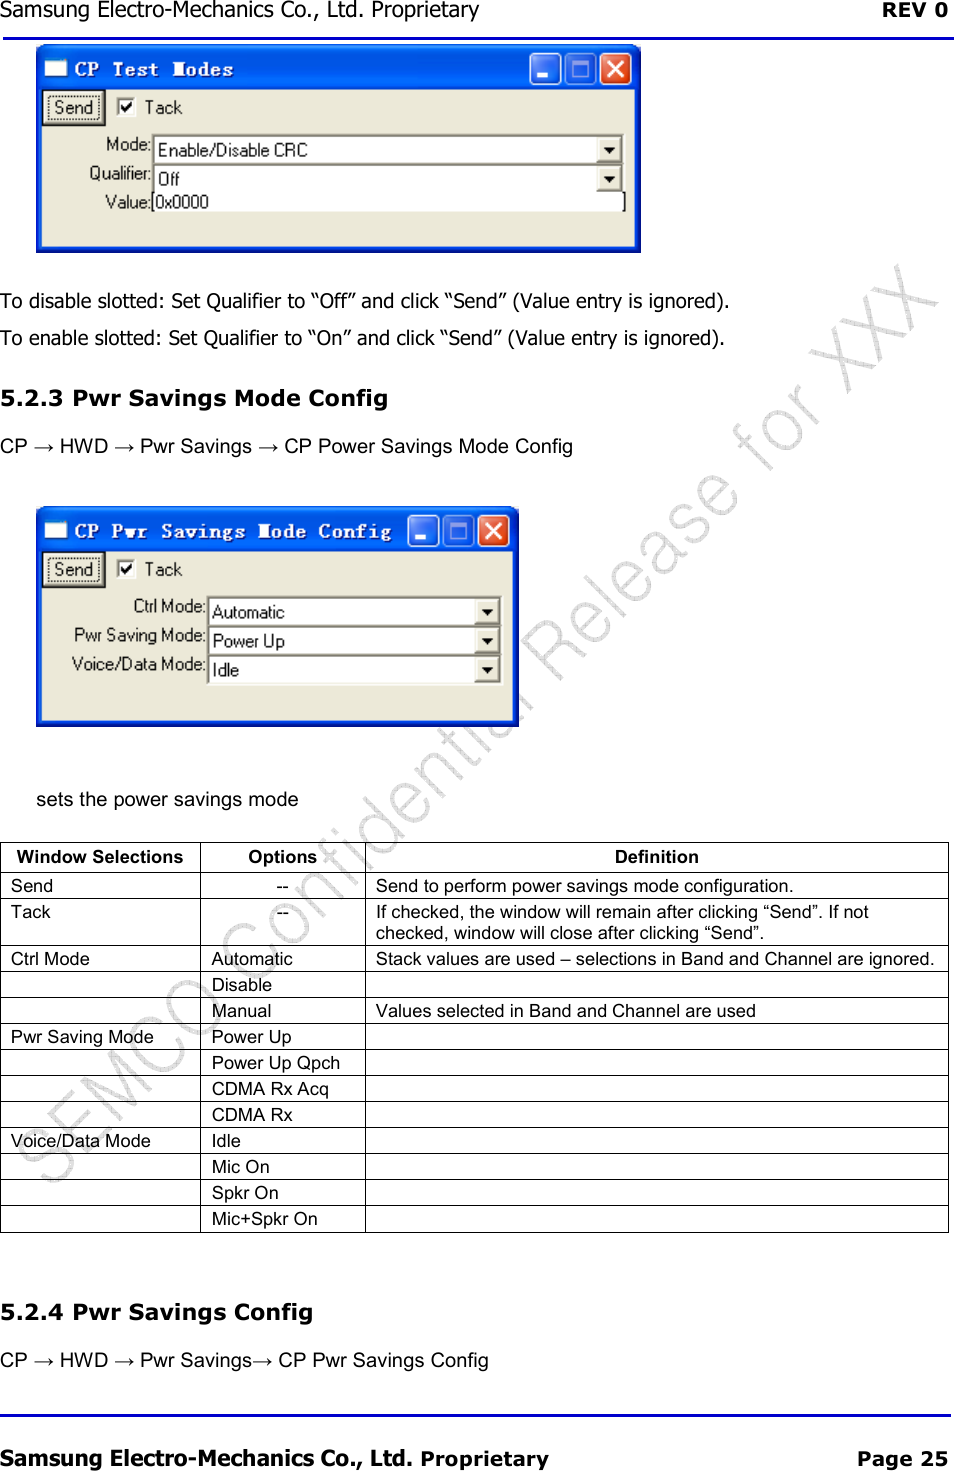 Samsung Electro-Mechanics Co., Ltd. Proprietary  REV 0 Samsung Electro-Mechanics Co., Ltd. Proprietary  Page 25  To disable slotted: Set Qualifier to “Off” and click “Send” (Value entry is ignored). To enable slotted: Set Qualifier to “On” and click “Send” (Value entry is ignored). 5.2.3  Pwr Savings Mode Config CP → HWD → Pwr Savings → CP Power Savings Mode Config  sets the power savings mode Window Selections Options  Definition Send  --  Send to perform power savings mode configuration. Tack  --  If checked, the window will remain after clicking “Send”. If not checked, window will close after clicking “Send”. Ctrl Mode  Automatic  Stack values are used – selections in Band and Channel are ignored.    Disable     Manual  Values selected in Band and Channel are used Pwr Saving Mode  Power Up     Power Up Qpch     CDMA Rx Acq     CDMA Rx   Voice/Data Mode  Idle     Mic On     Spkr On     Mic+Spkr On    5.2.4  Pwr Savings Config CP → HWD → Pwr Savings→ CP Pwr Savings Config 